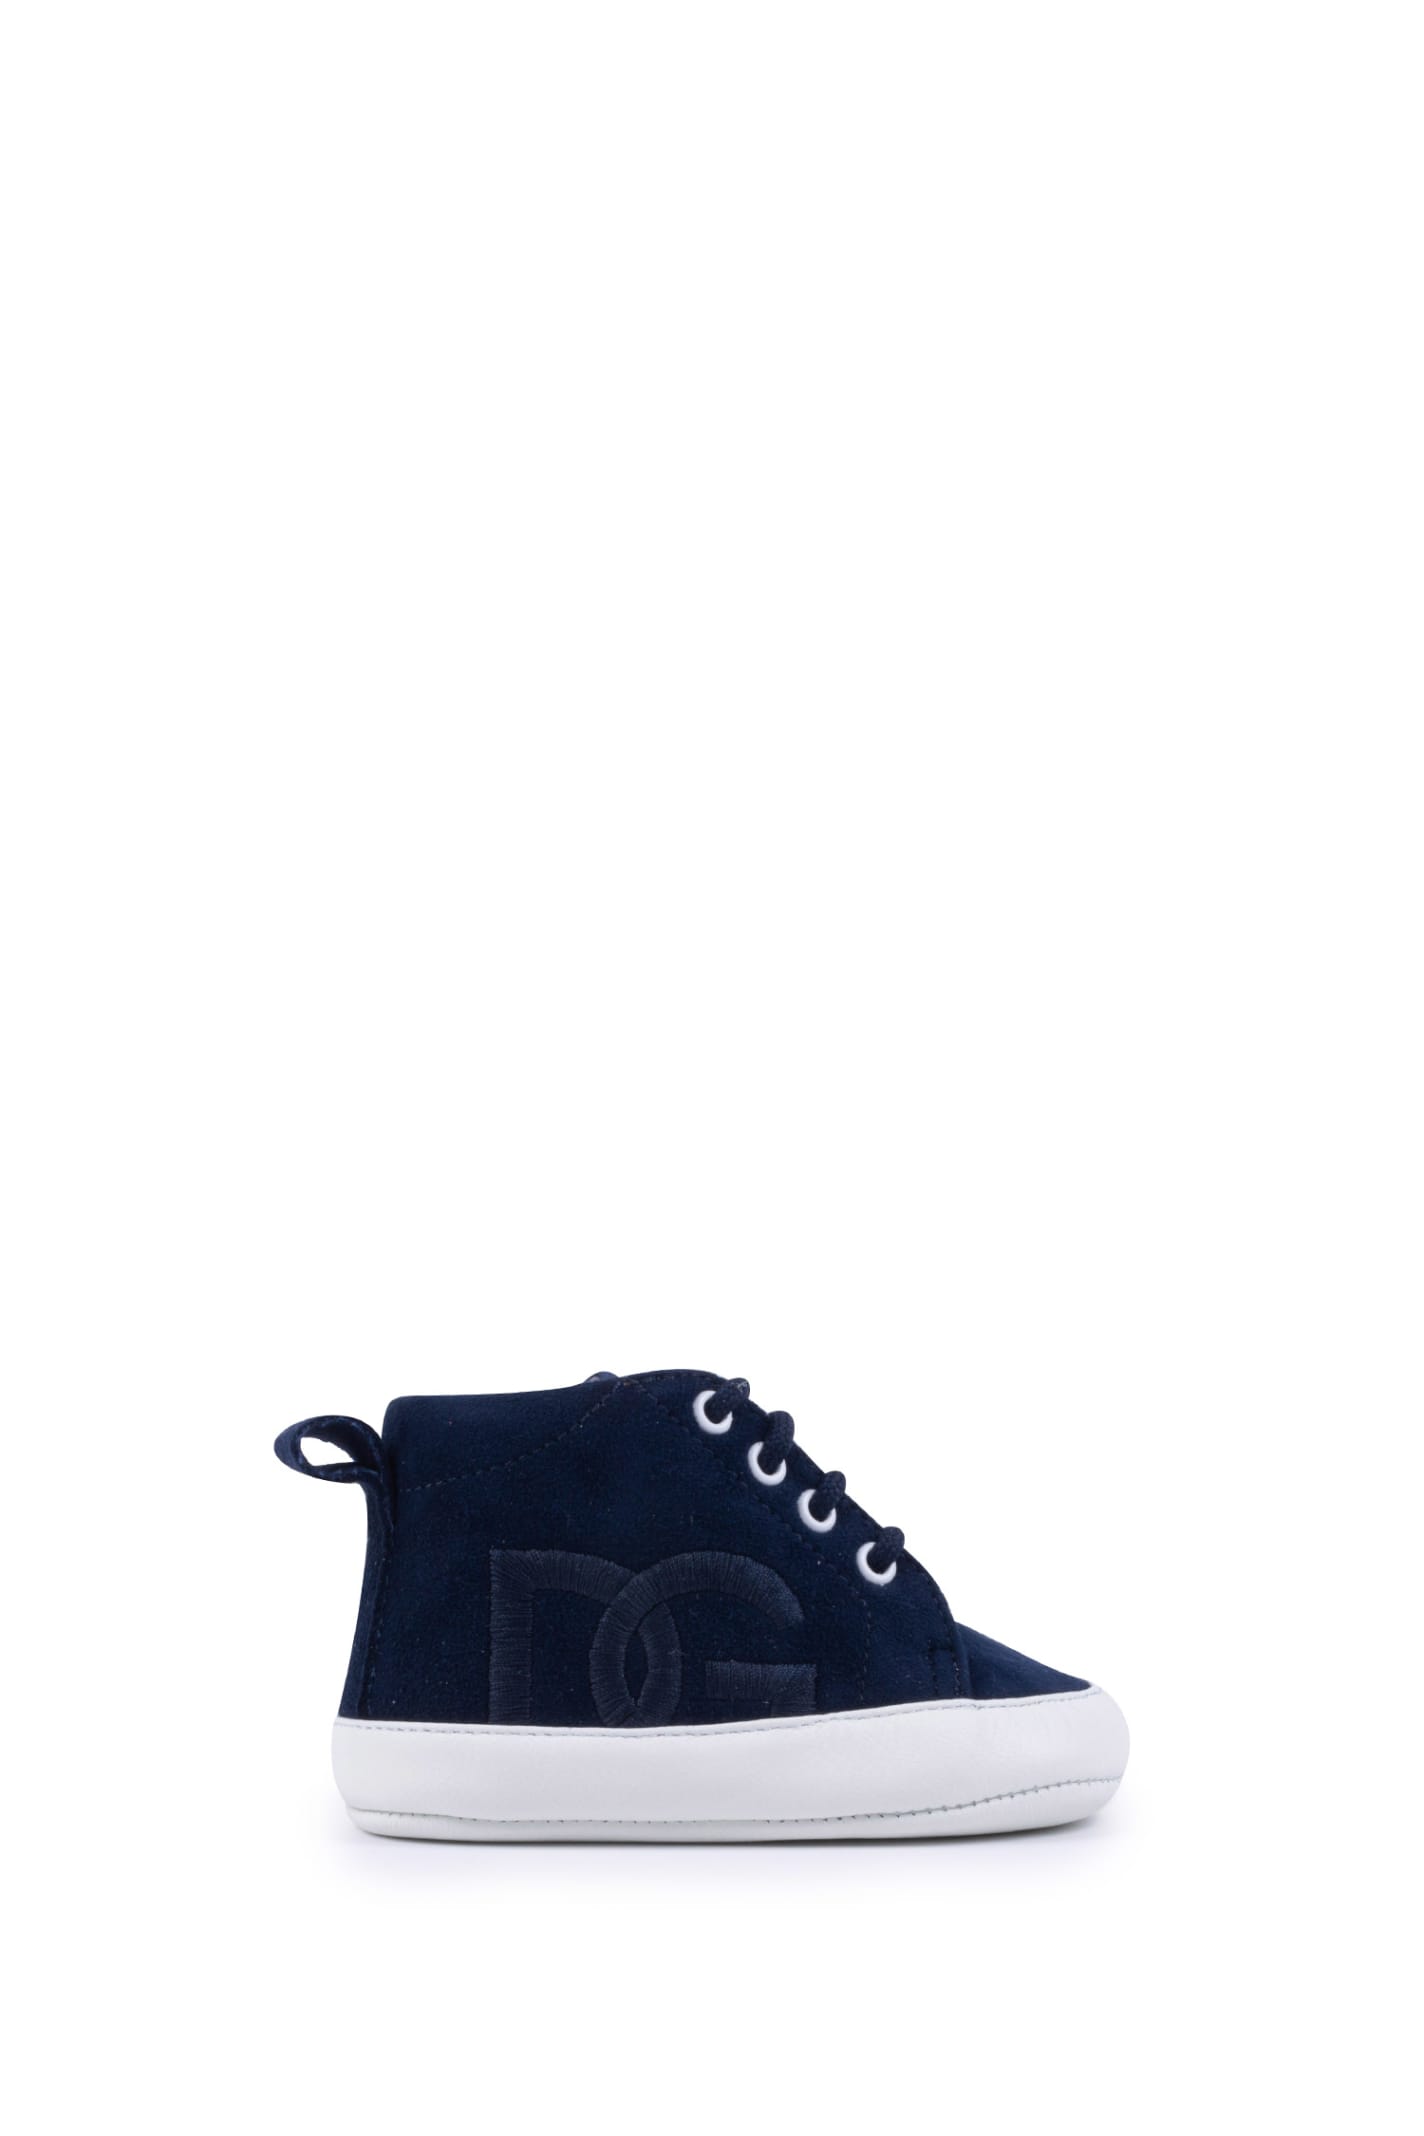 Dolce & Gabbana Suede Sneakers With Dg Logo Embroidery